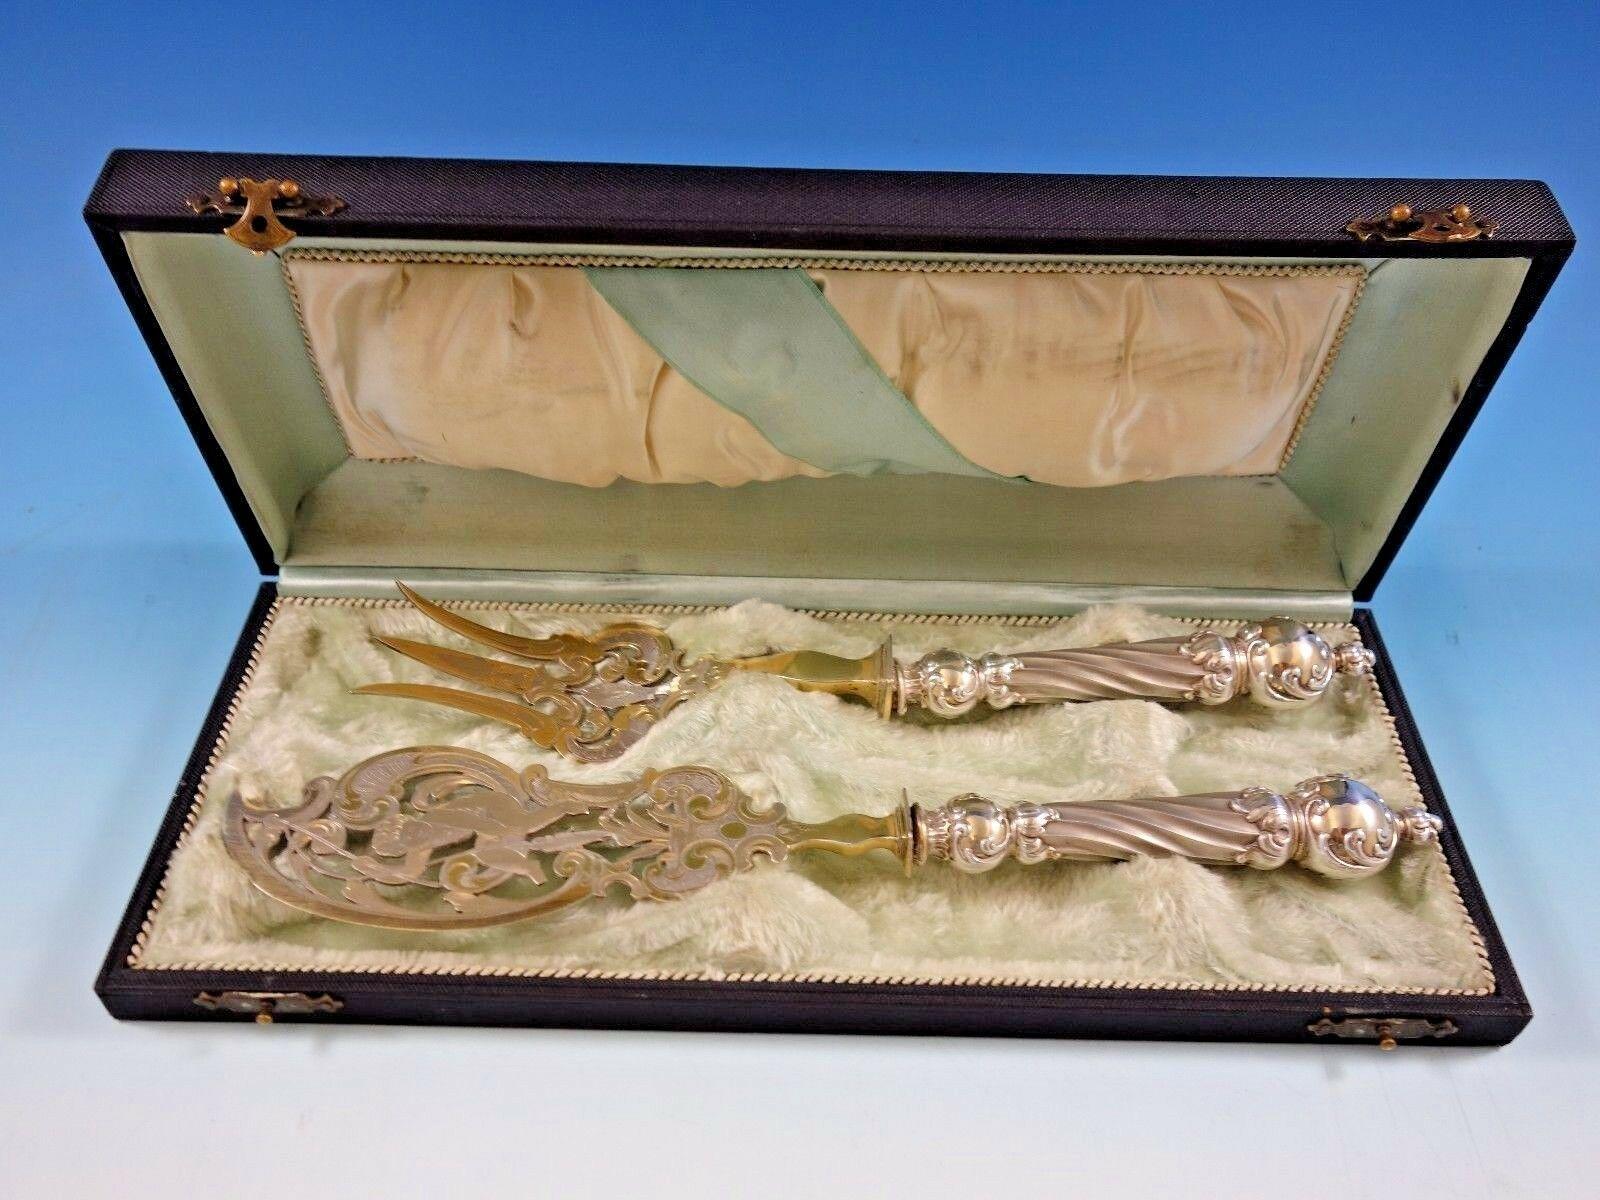 European Art silver

Gorgeous European .800 art silver fish serving set, 2-piece, with large bulbous column-like silver handles and partial gilt silver plate blades and tines. The knife measures 11 3/8